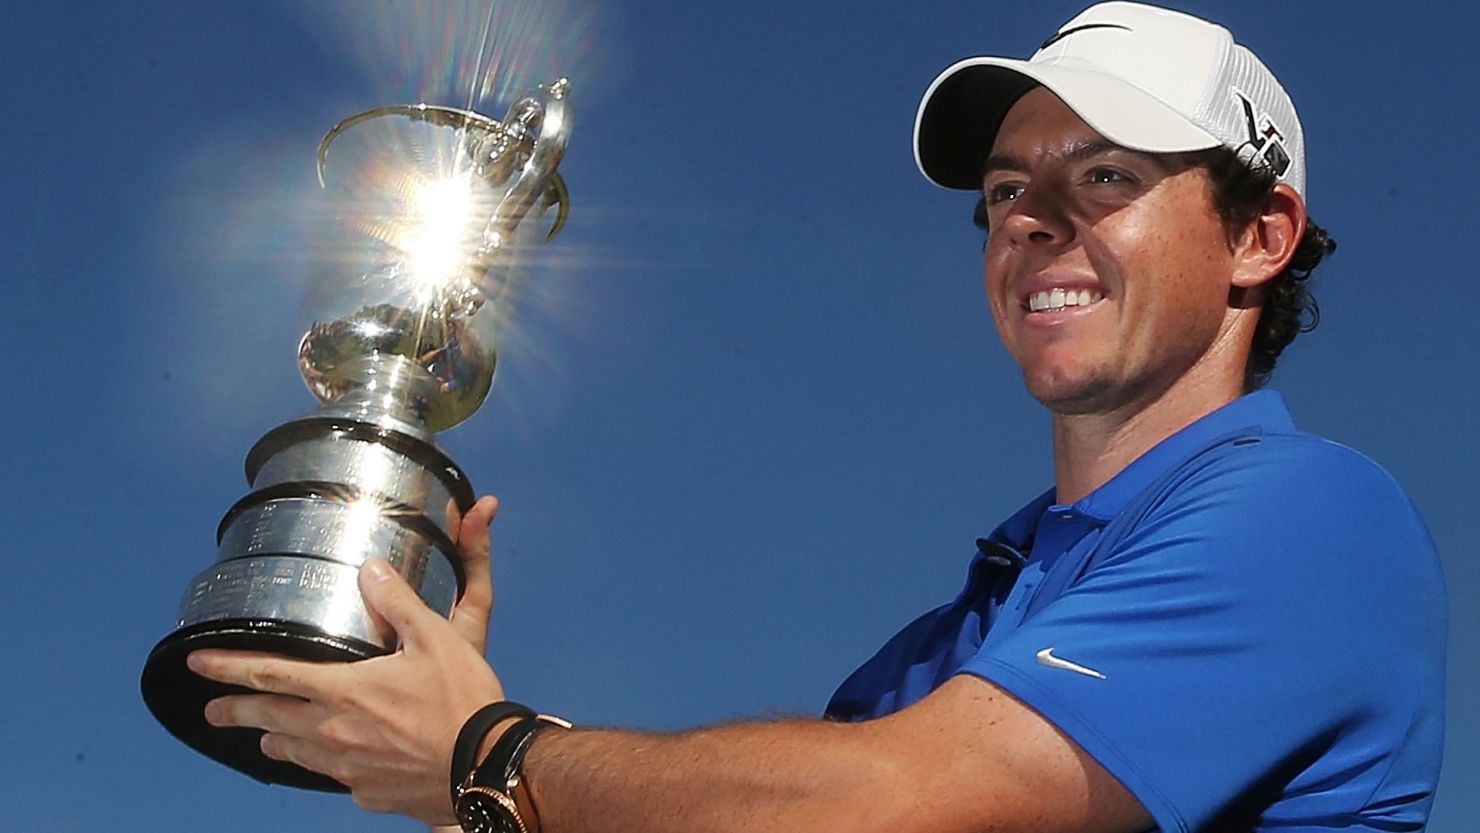 Rory McIlory gets his hands on a trophy at last in 2013 after a dramatic one-shot victory over Adam Scott at the Australian Open.